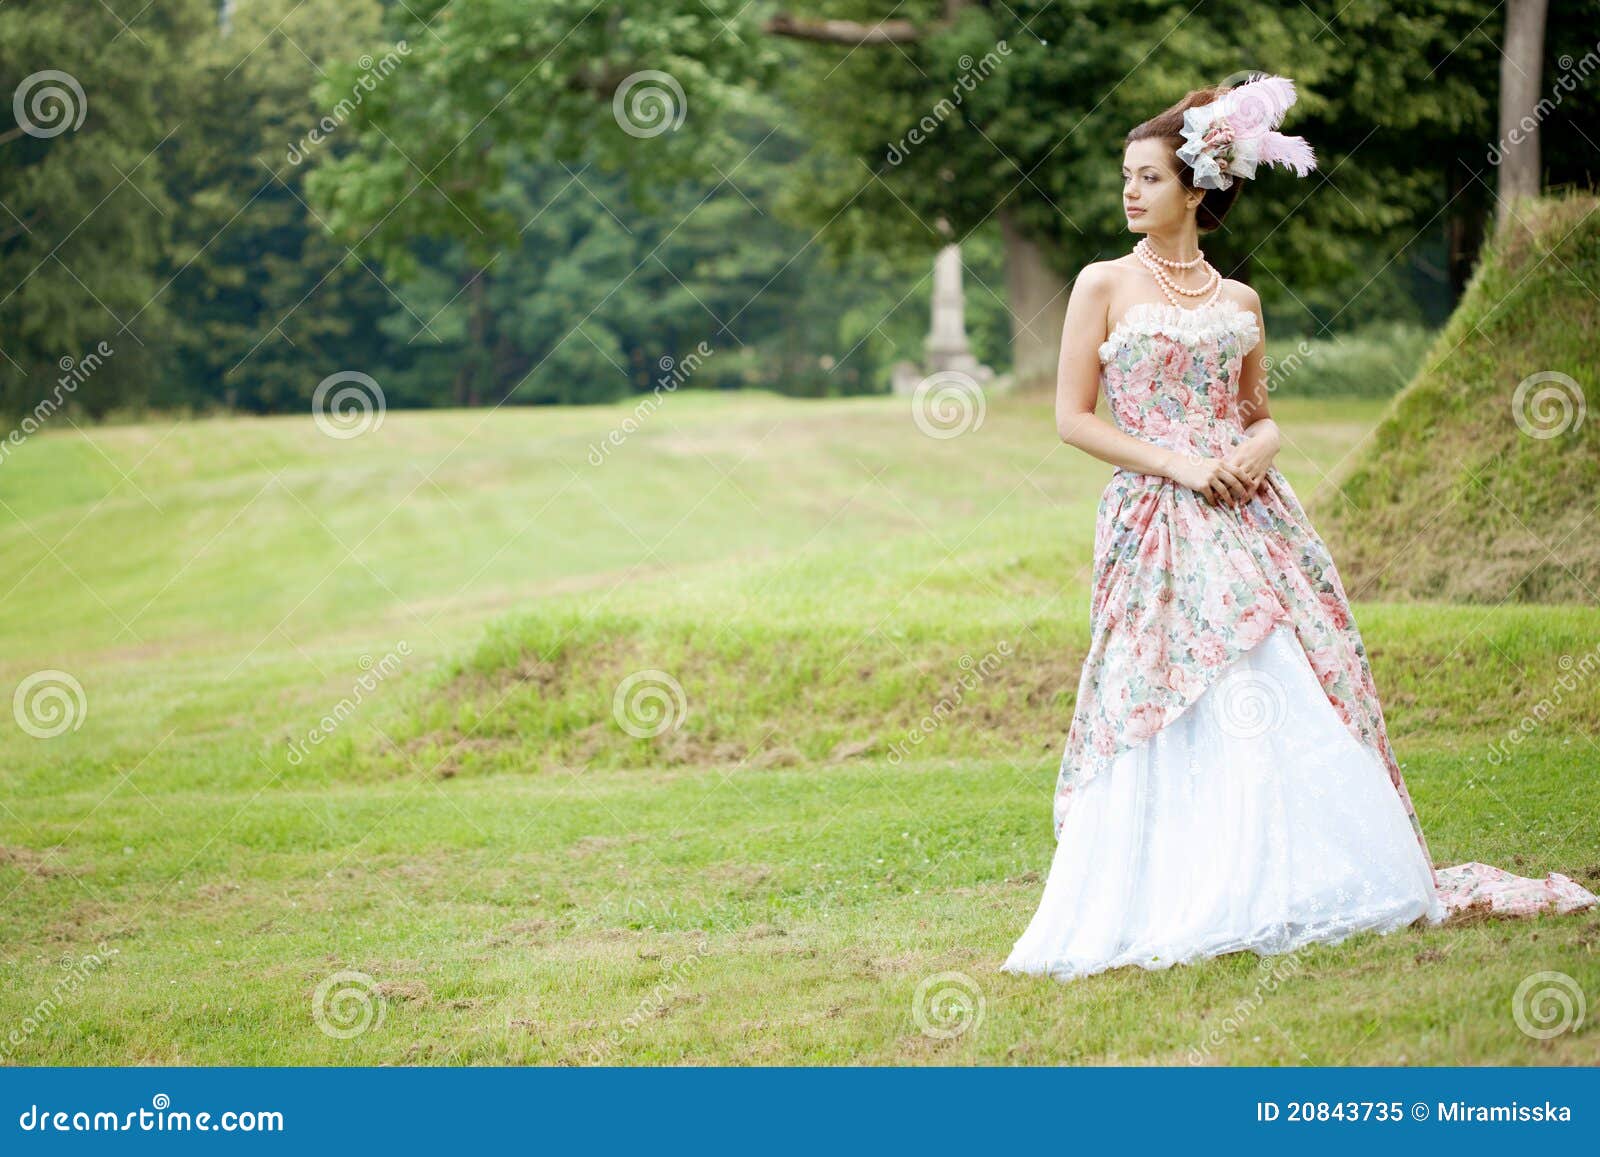 577,518 Dress Nature Stock Photos - Free & Royalty-Free Photos from Dreamstime